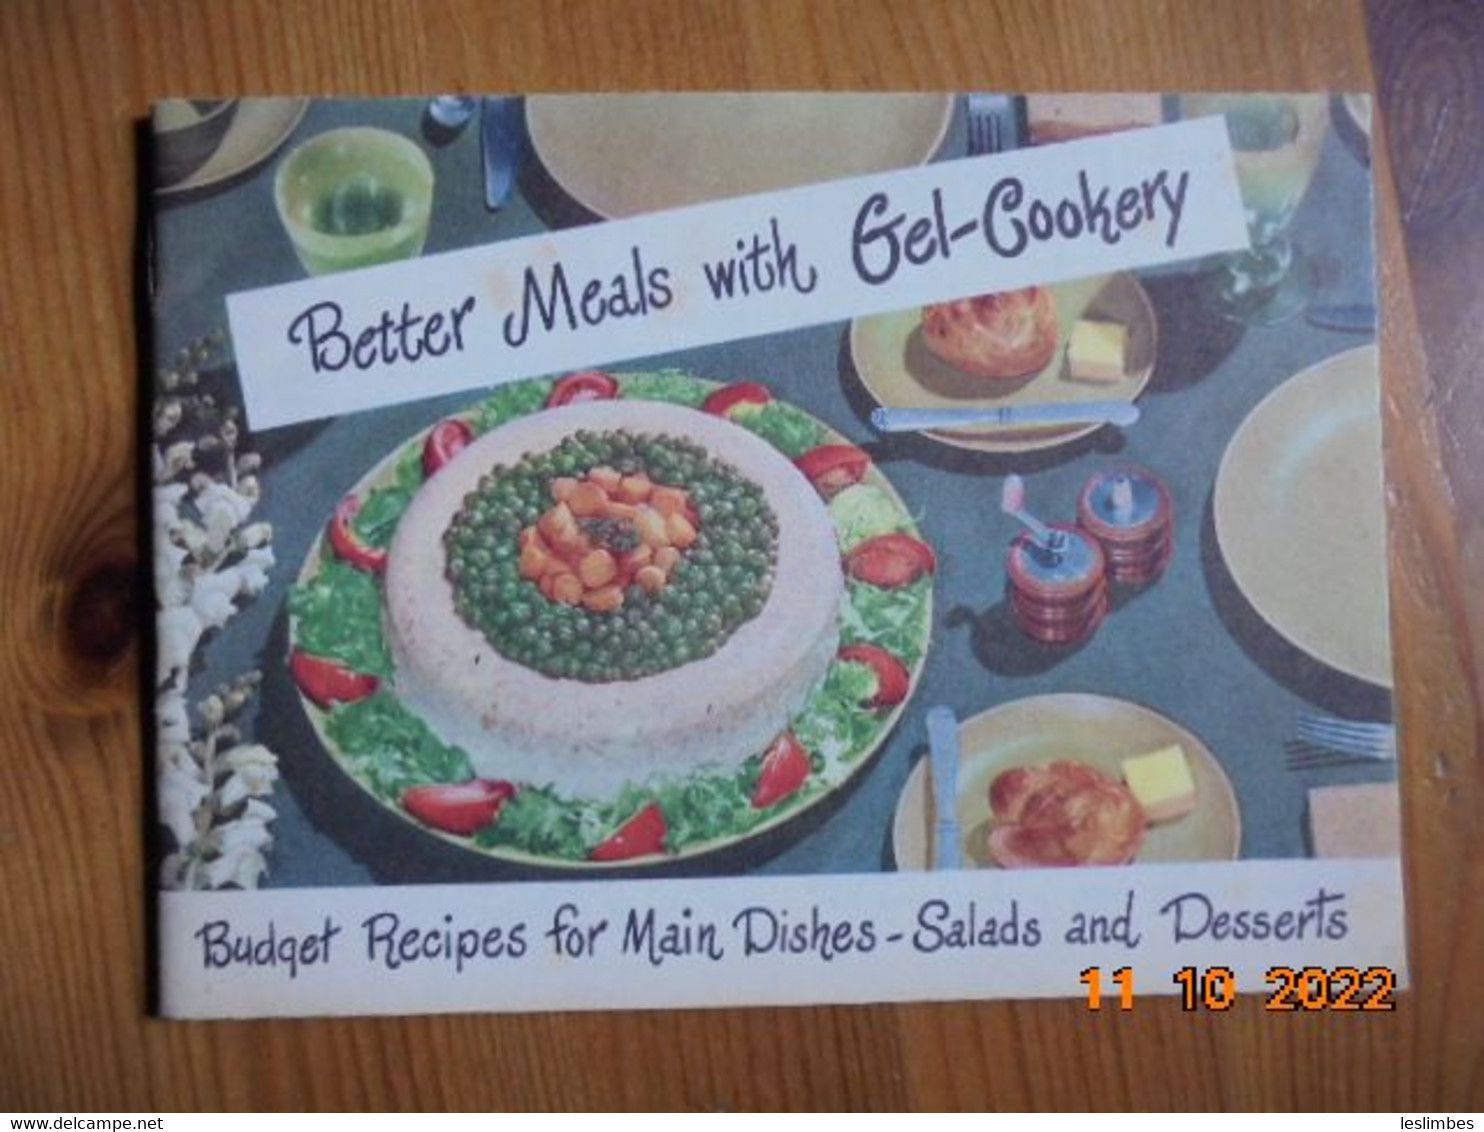 Better Meals With Gel Cookery : Budget Recipes For Main Dishes, Salads And Desserts. Charles B. Knox Gelatine Co. 1952 - American (US)